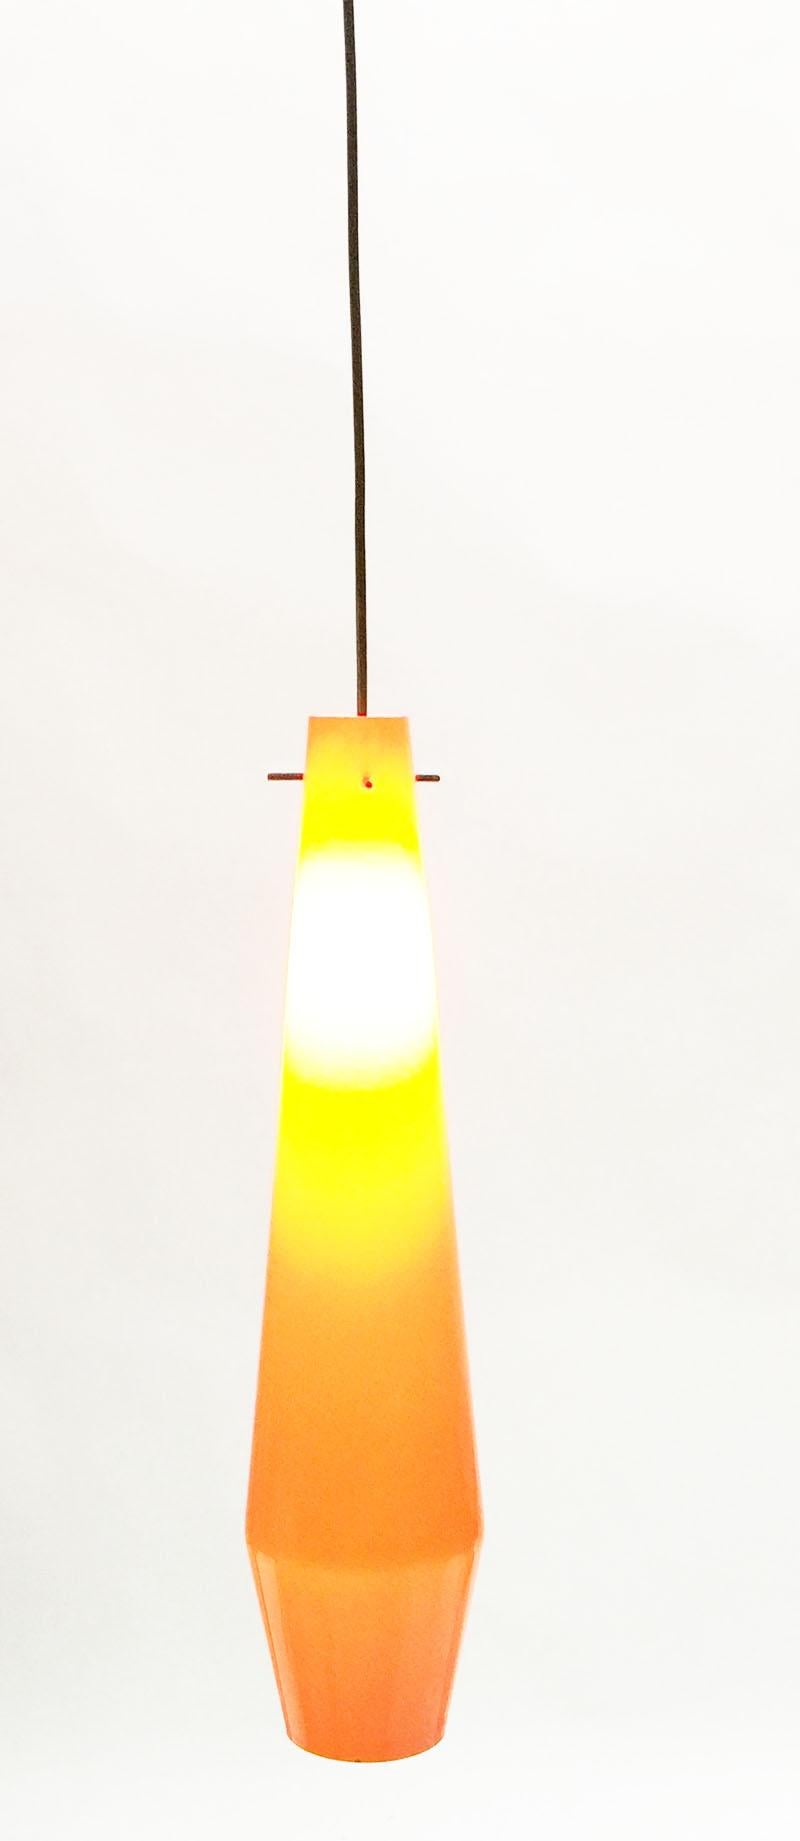 Orange glass pendant by Gino Vistosi, 1950s, Italy

Gino Vistosi for Murano, Italy
An orange glass tube with metal hang system (3 metal rods with screw)
It is newly black fabric wired
The height is adjustable by fixing the fabric wire into the